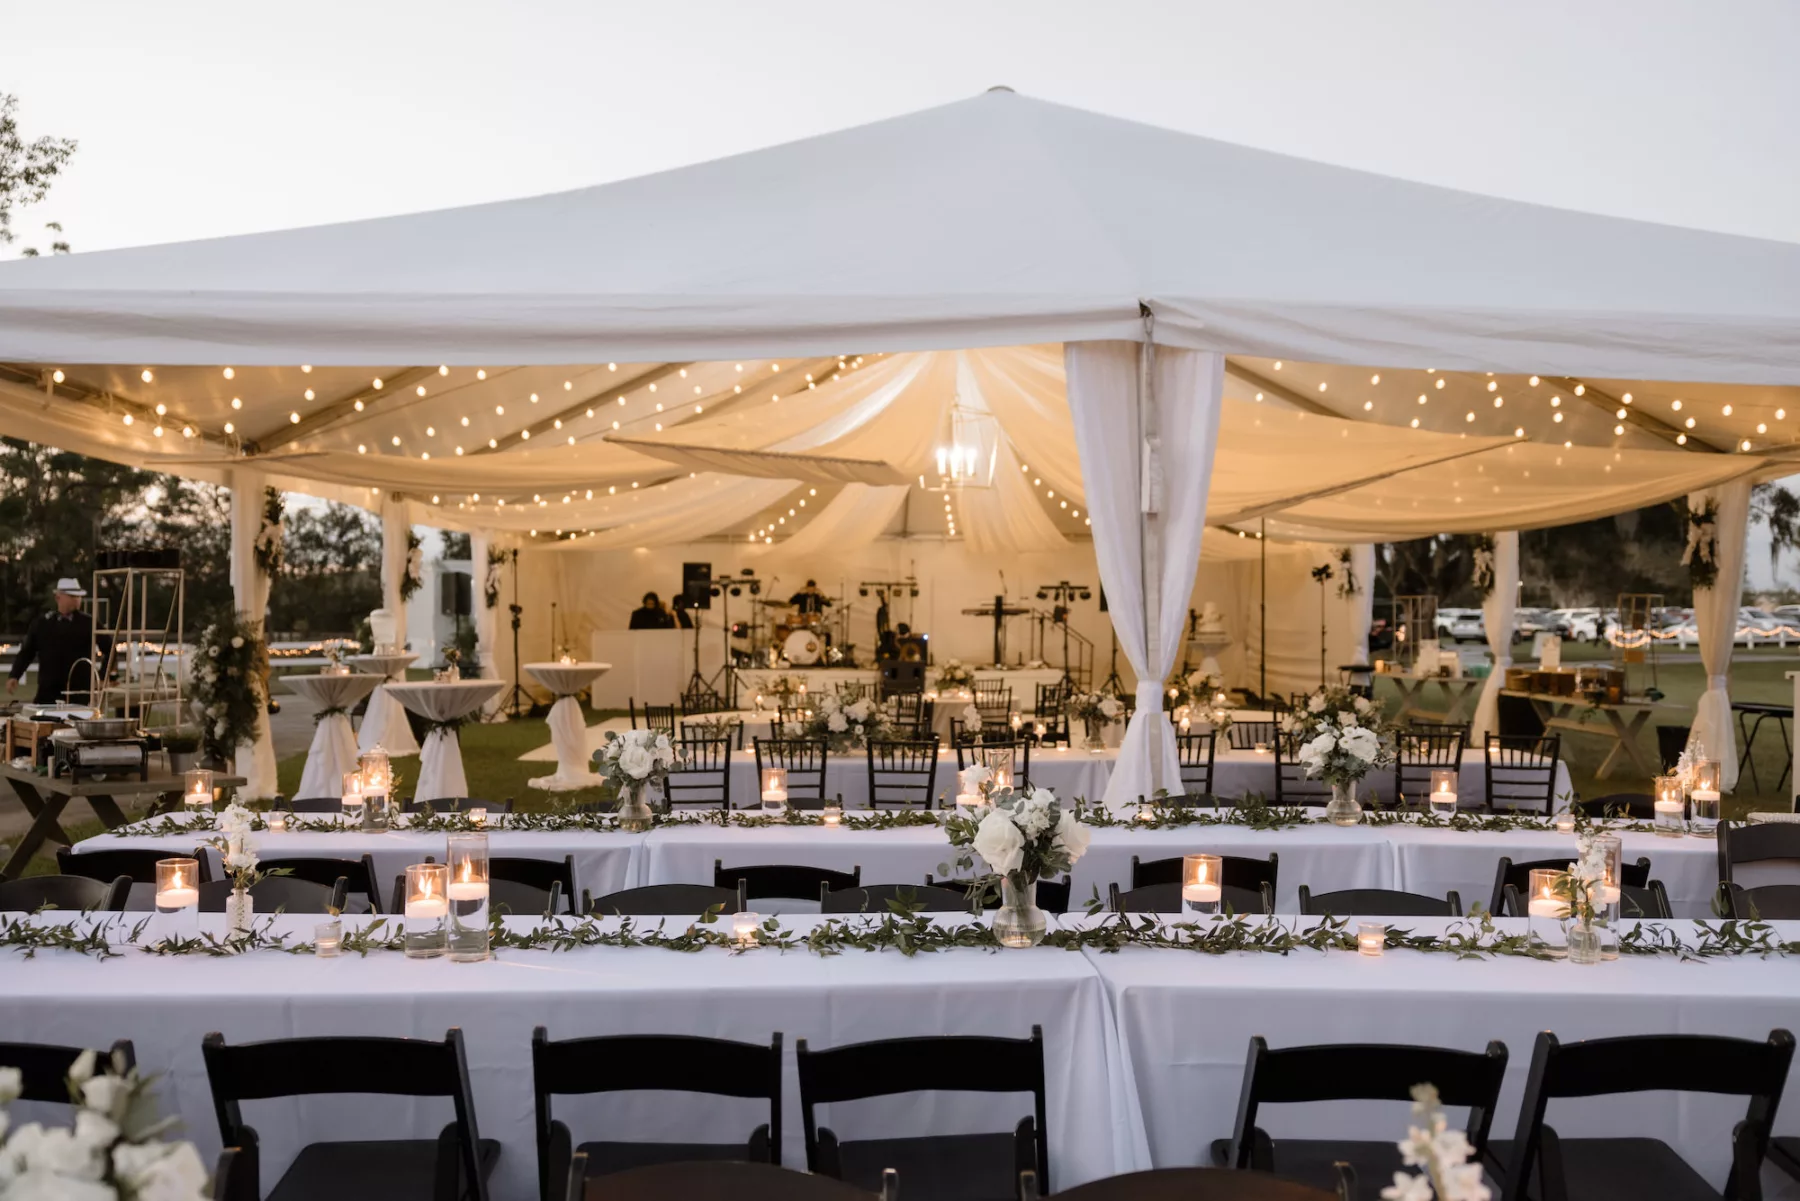 Timeless White and Black Tented Fall Wedding Reception Inspiration | Long Feasting Tables and Greenery Garland Centerpiece Decor Ideas